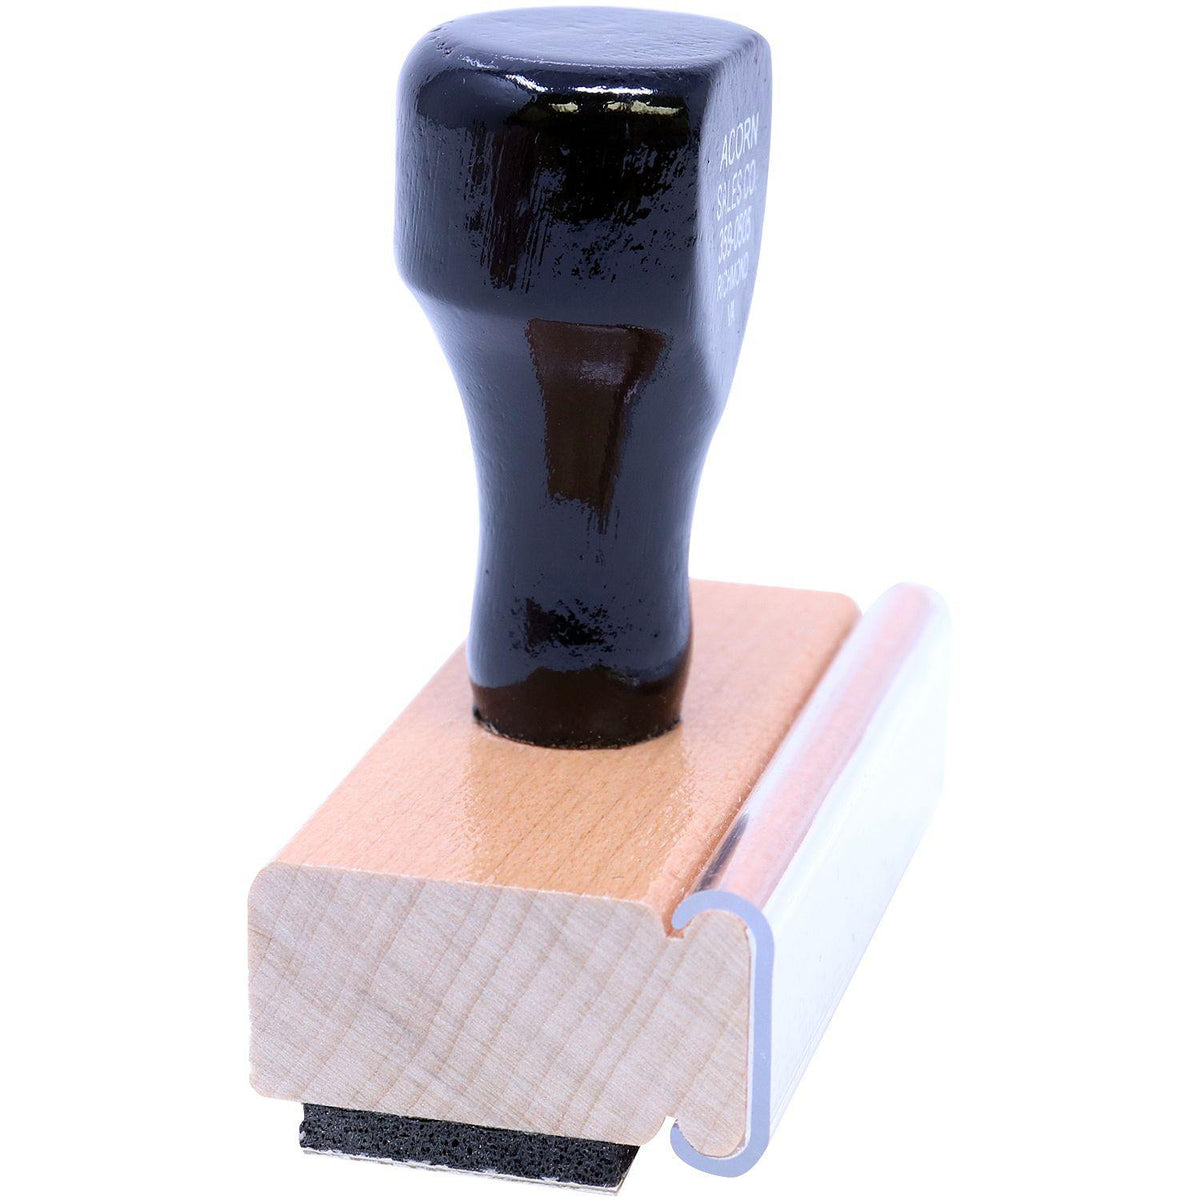 Side View of Large Optima Confidential Rubber Stamp at an Angle